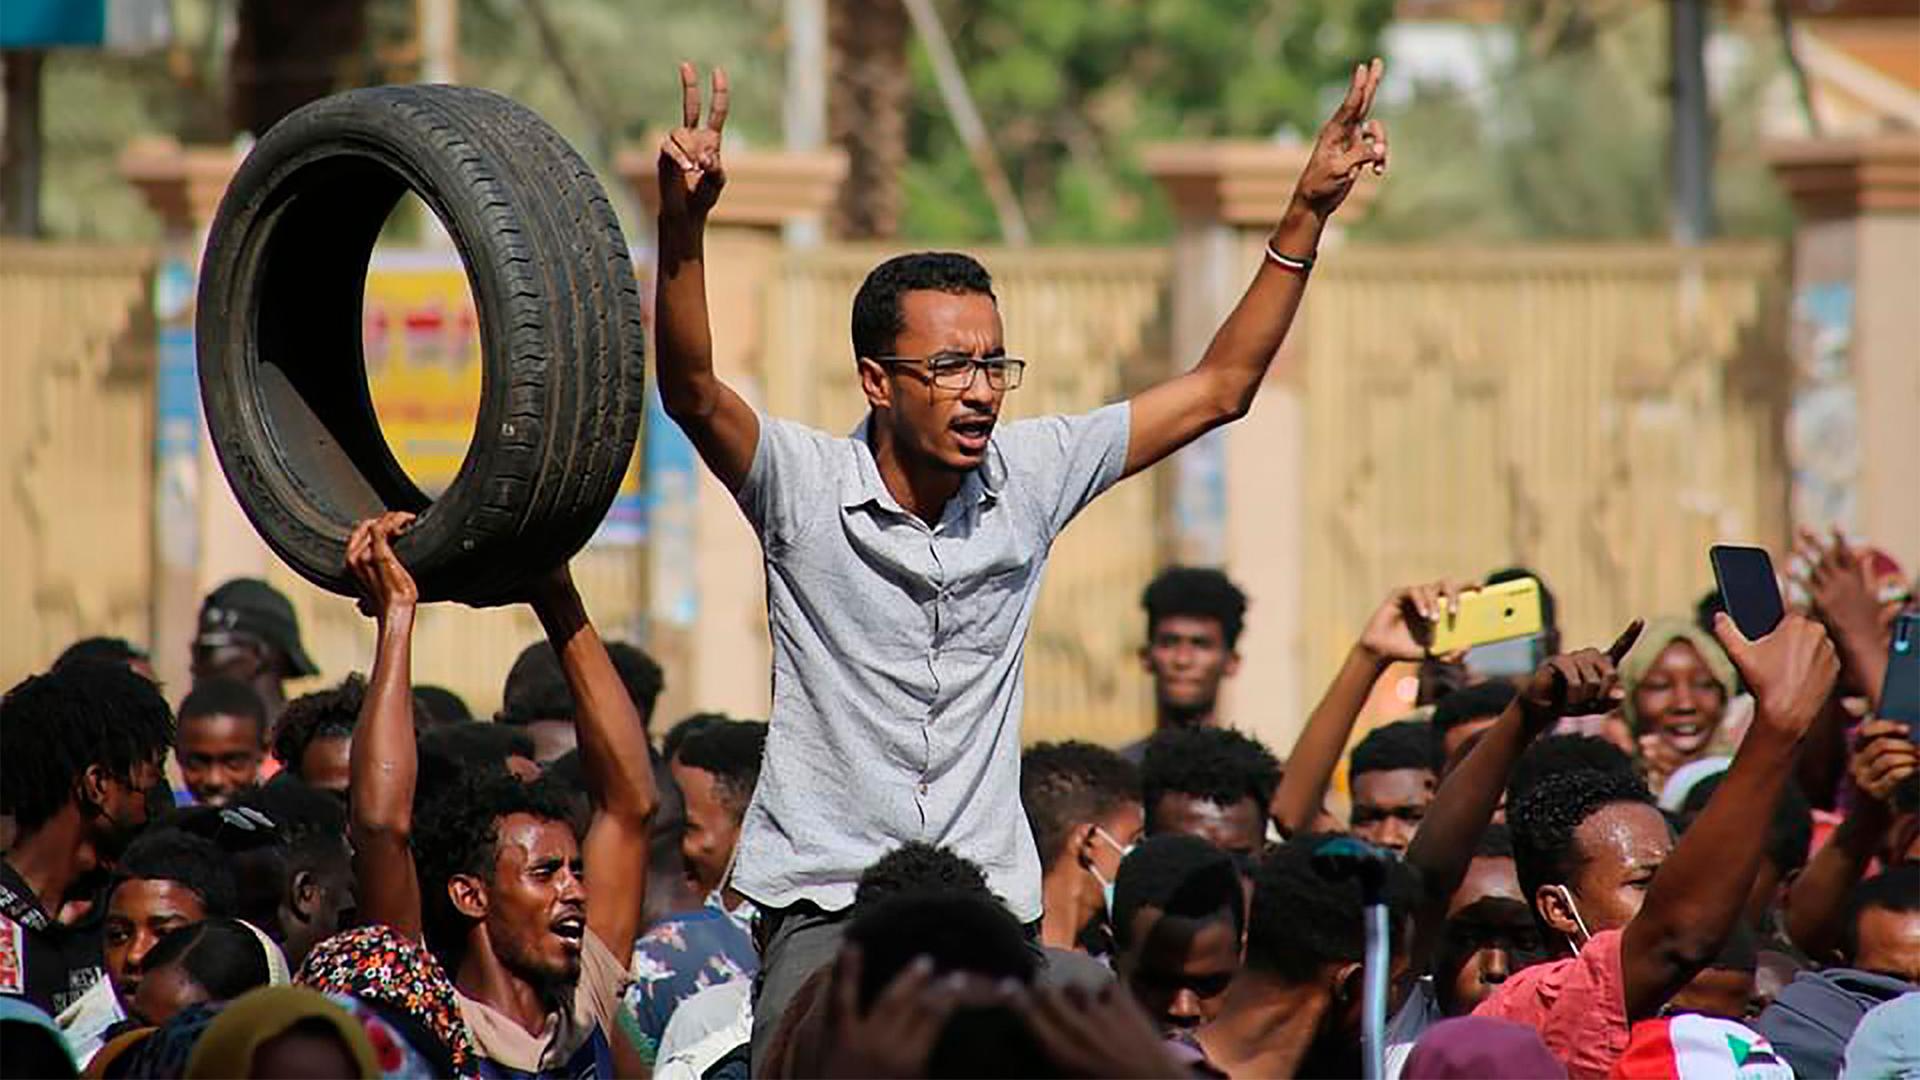 Thousands of pro-democracy protesters take to the streets to condemn a takeover by military officials in Khartoum, Sudan